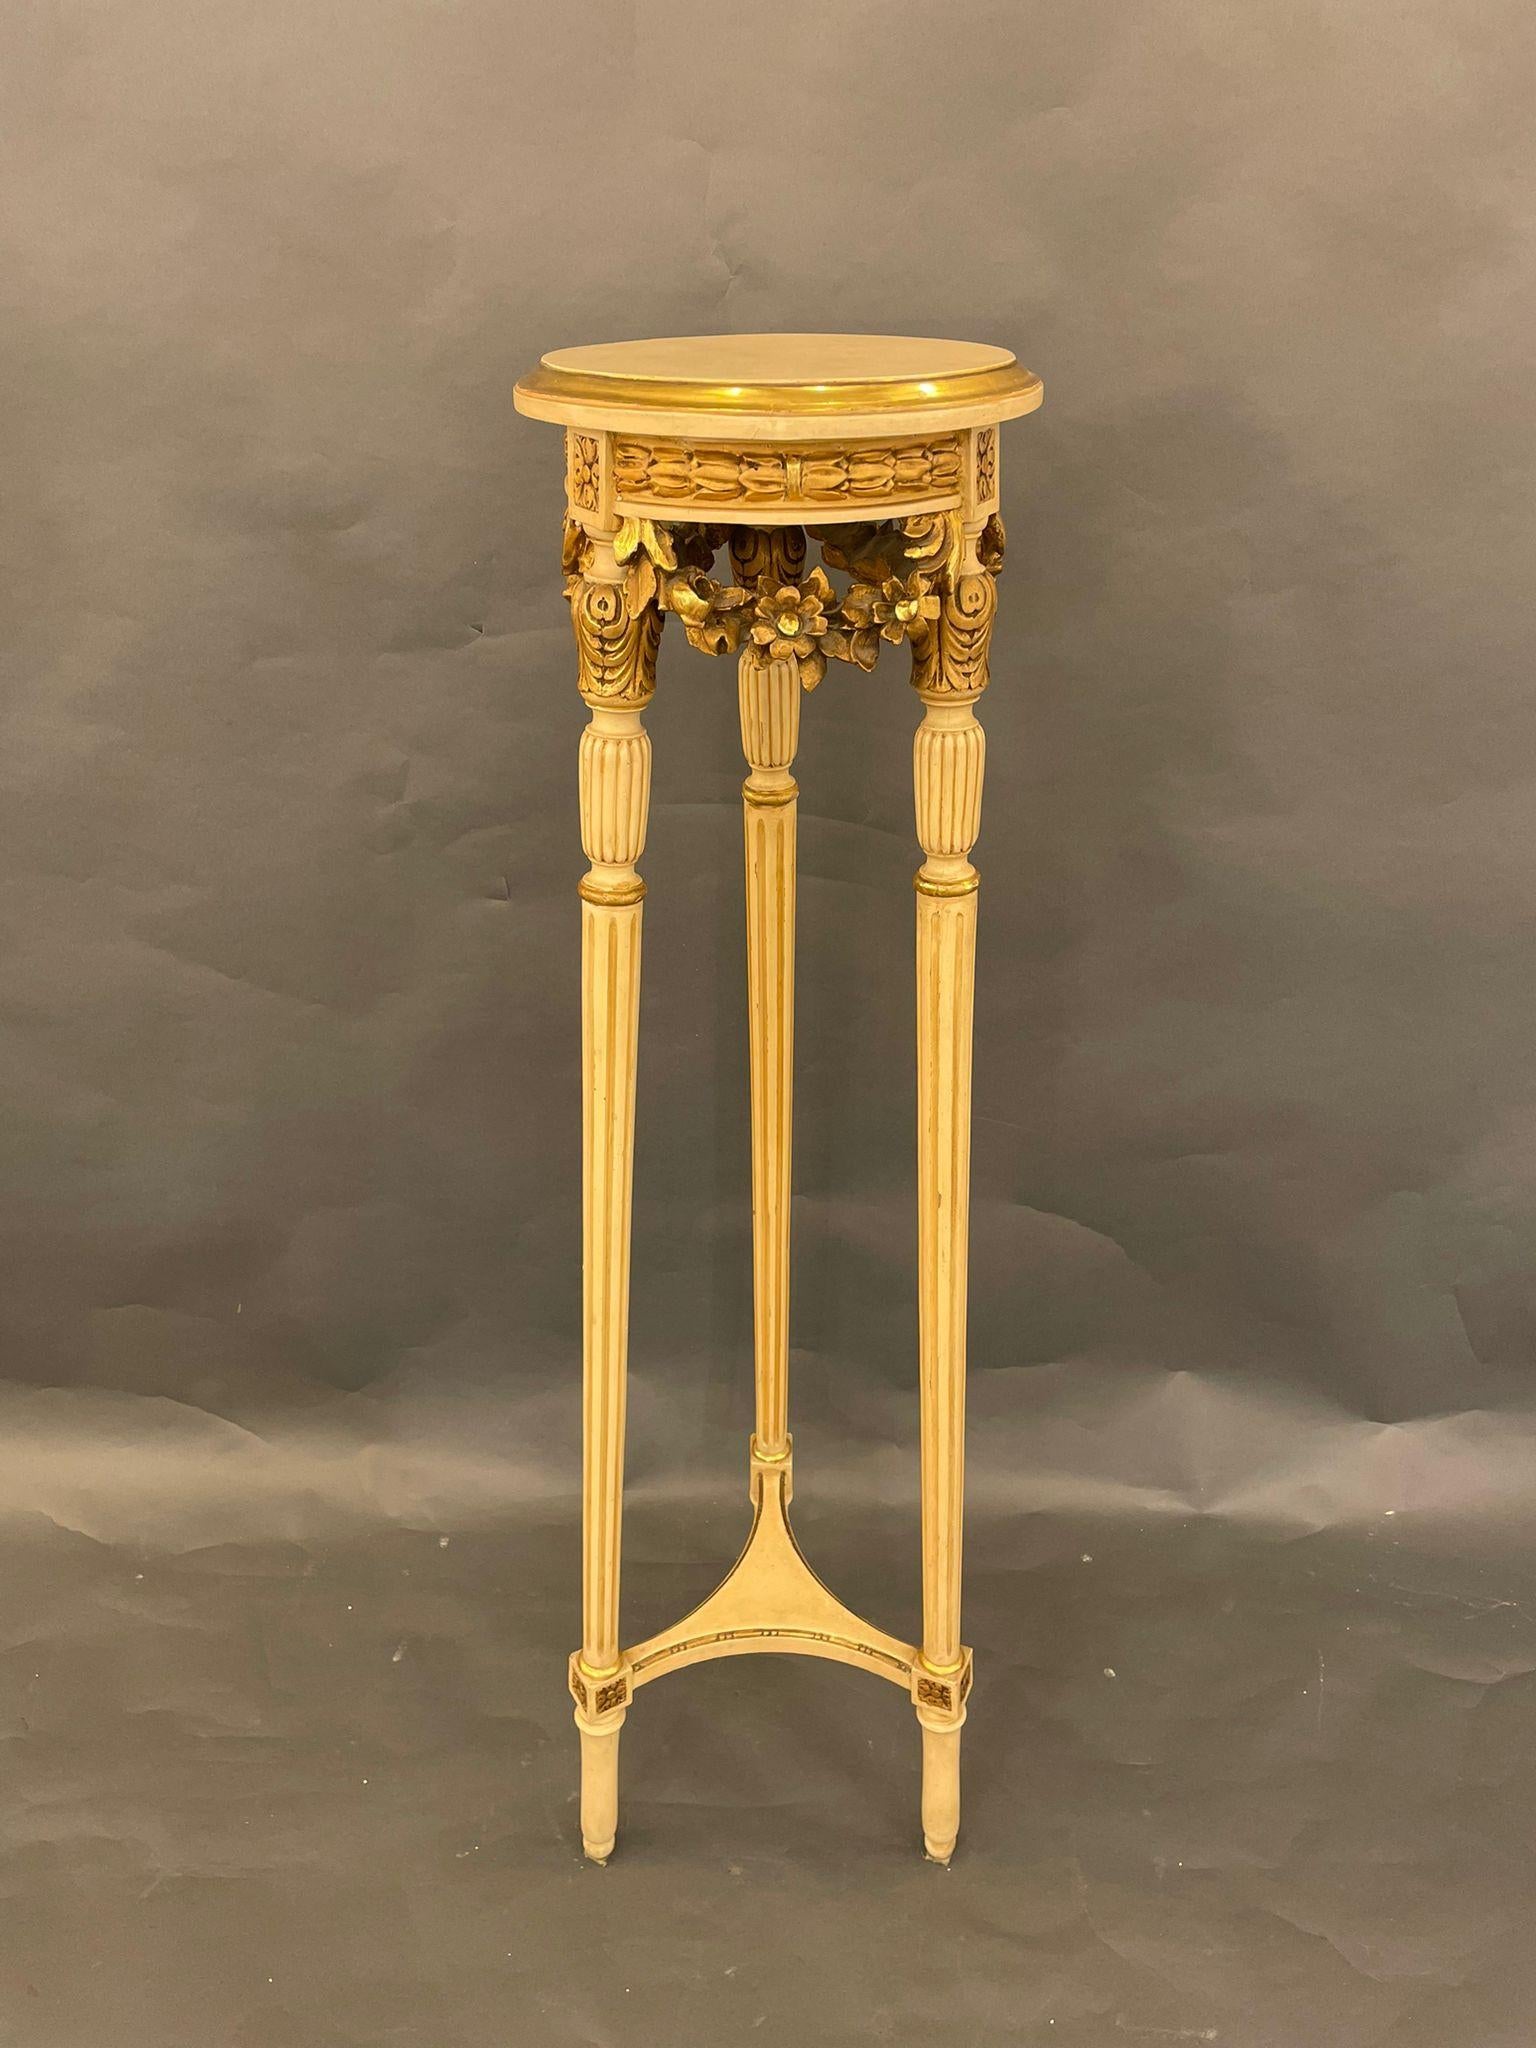 An elegant Jansens French Louis XVI style with a gilt-wood pedestal, late 19 century. The pedestal fixture is hand-carved with intricate floral motifs, overlays and gilding. You can see the age of the piece in its characteristic patina. This